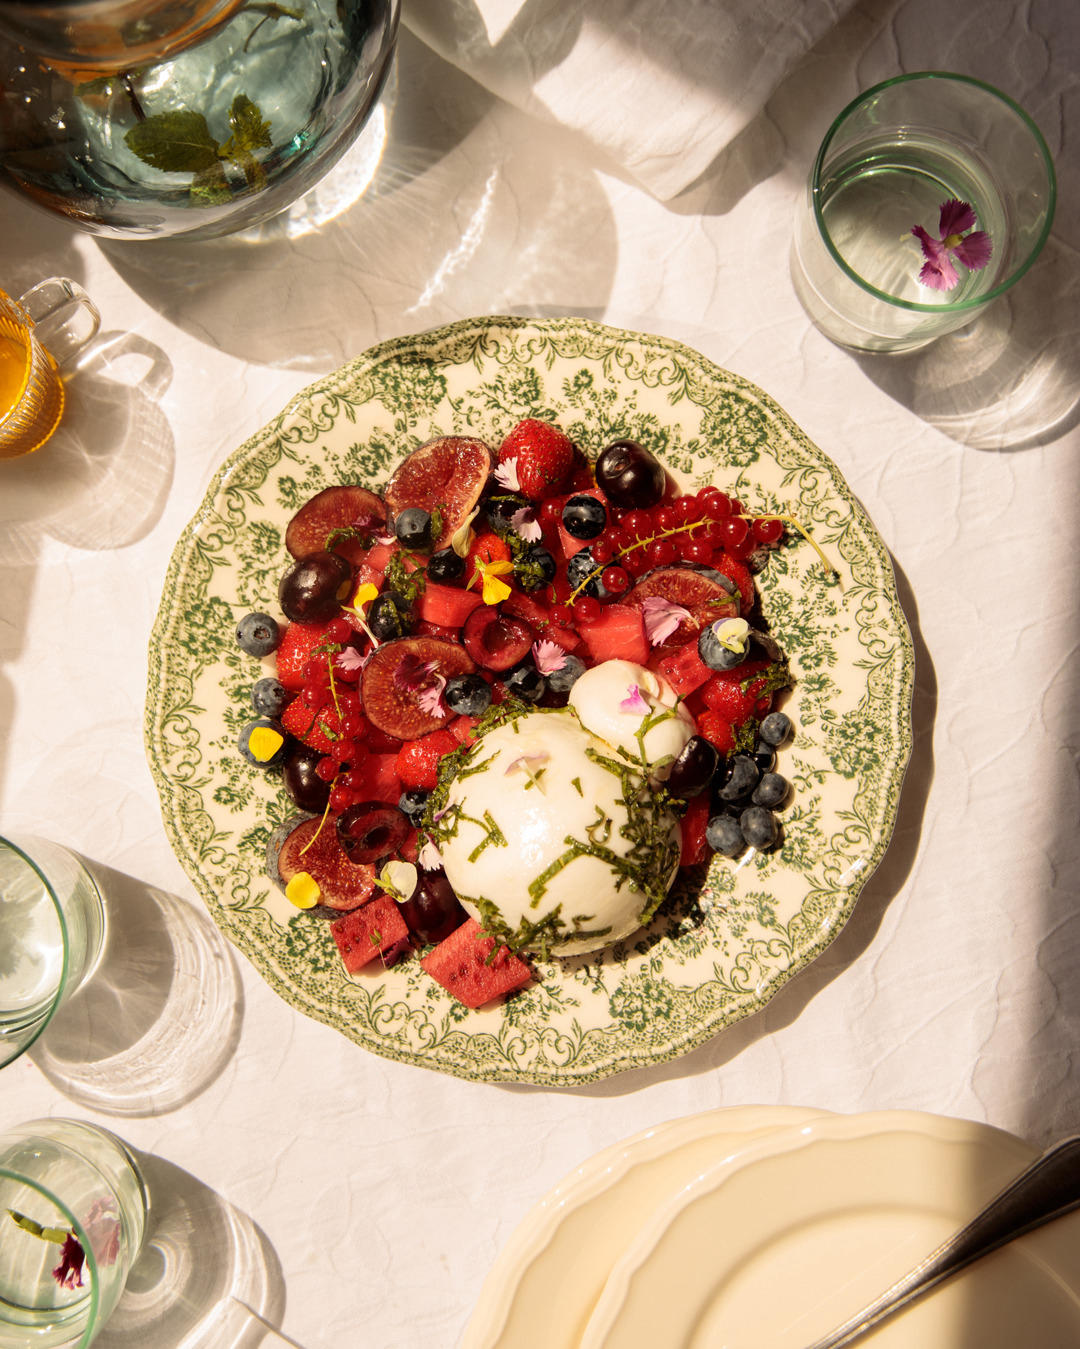 image  1 Zara Home Official - #zarahomerecipes BURRATA CHEESE WITH FRESH MINT OIL AND BERRY SALAD